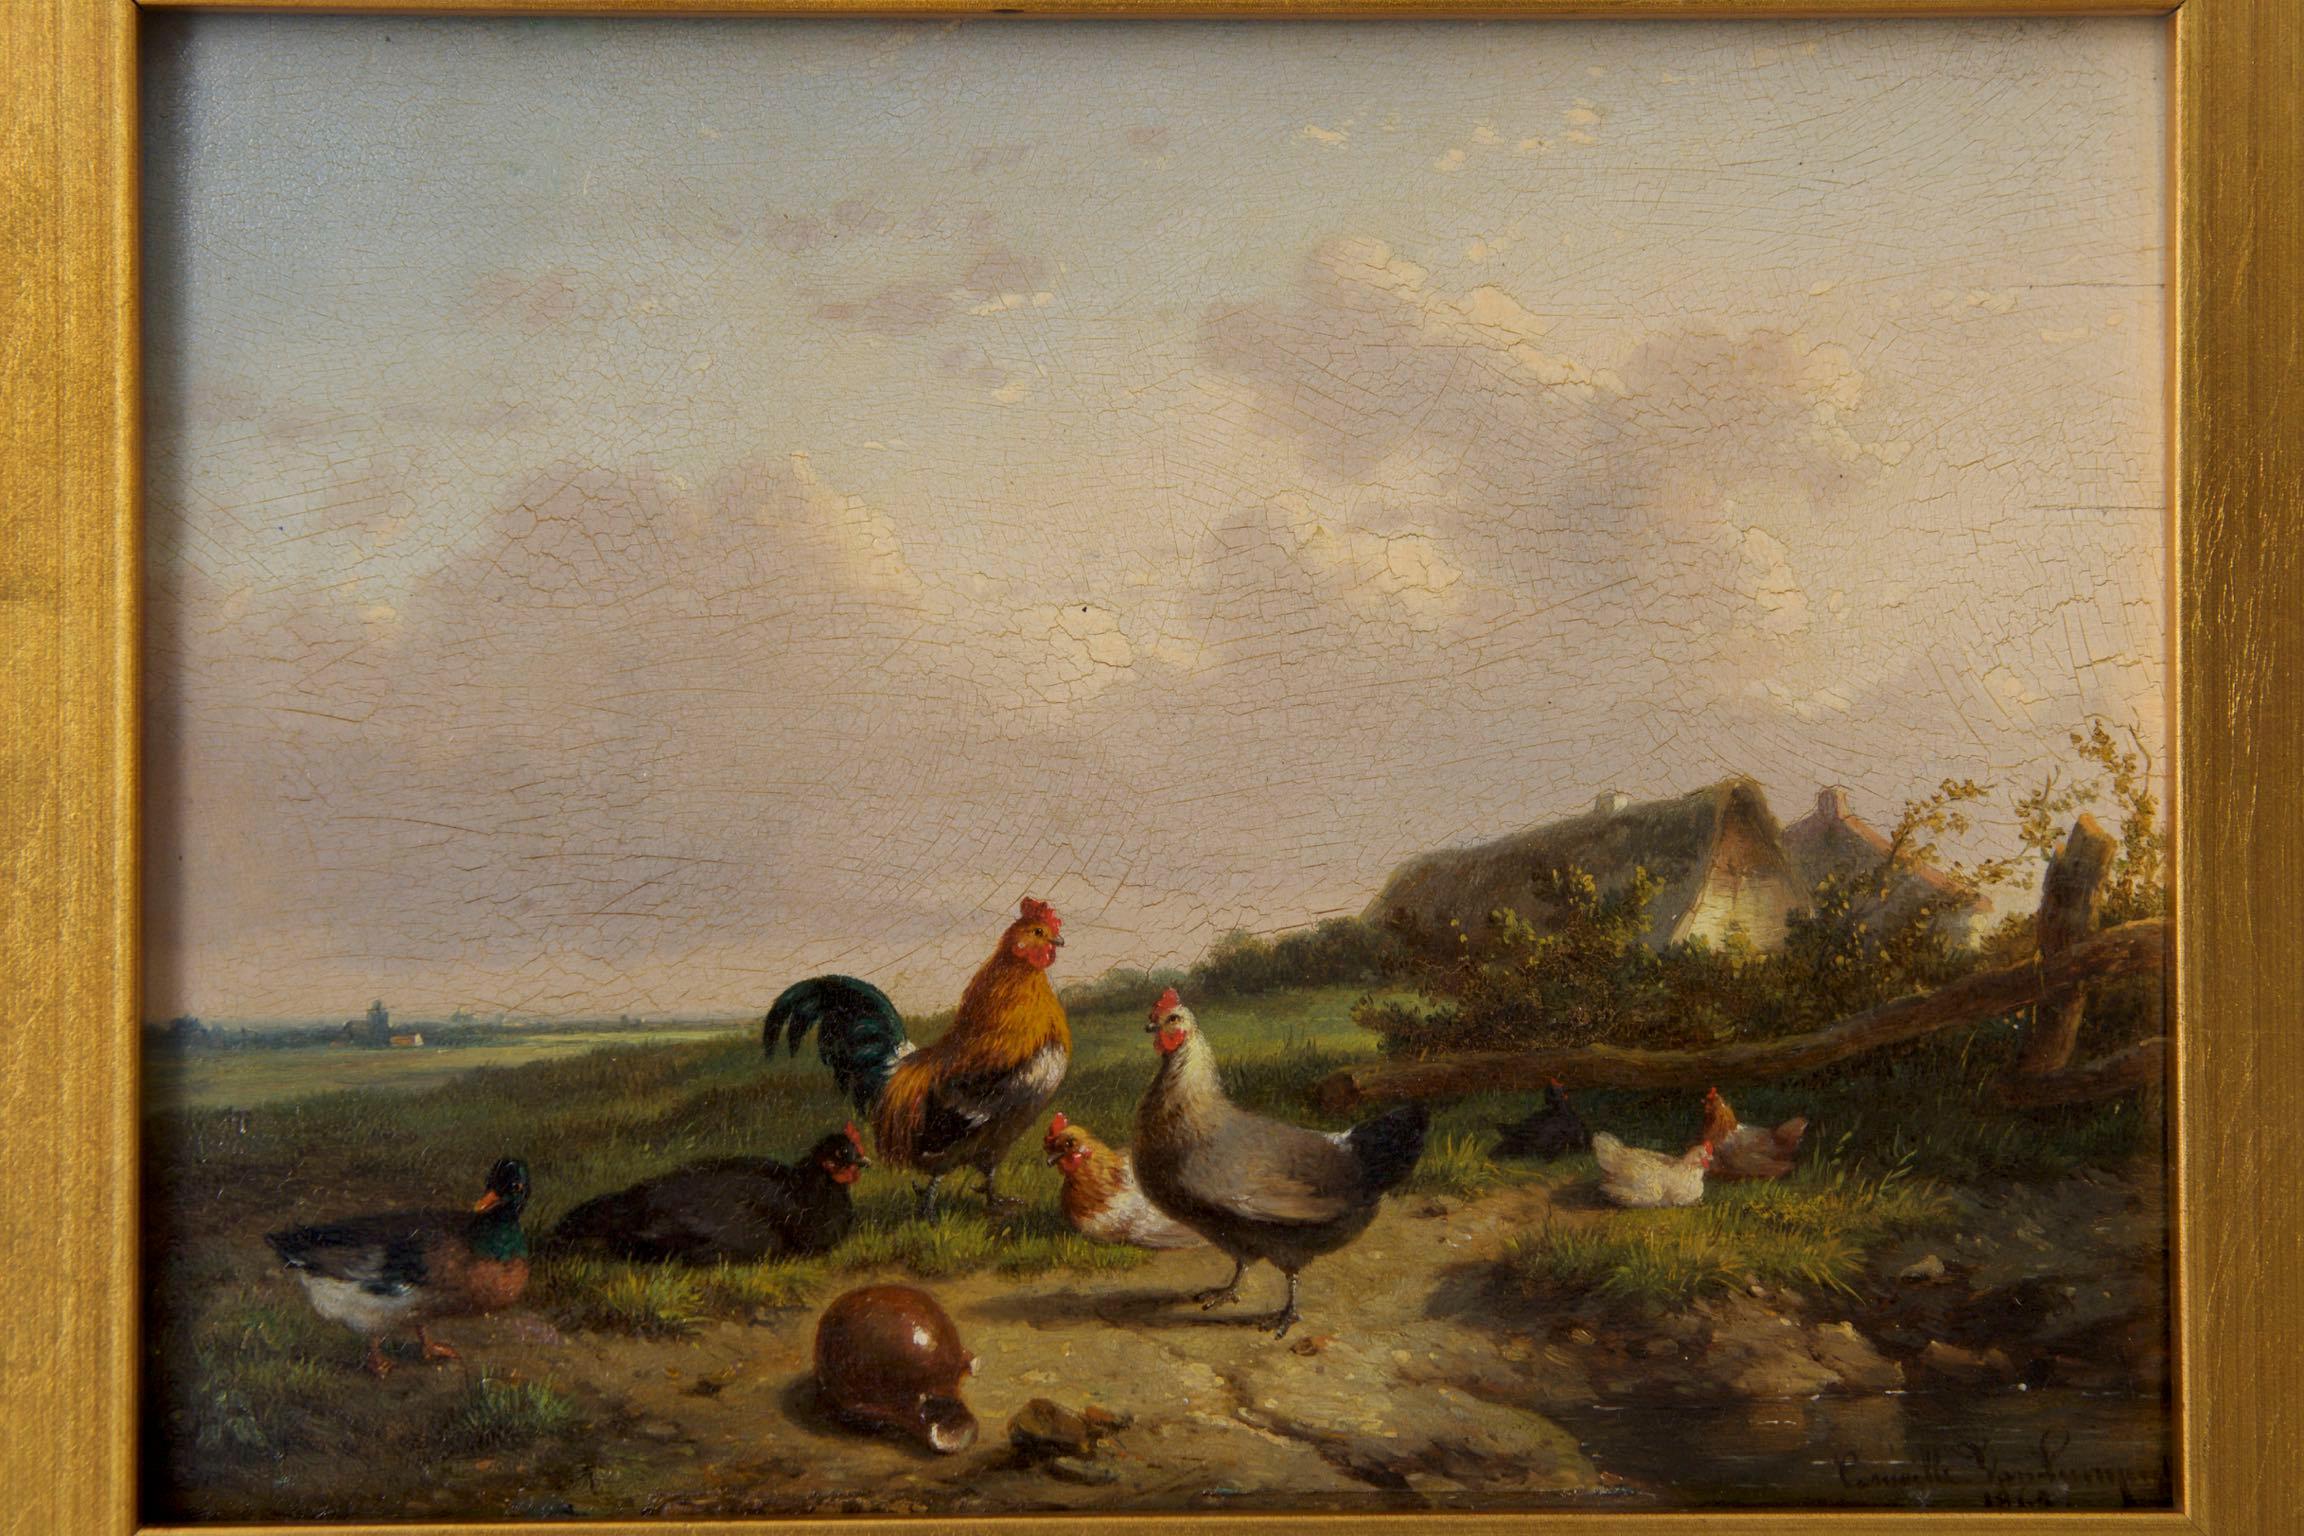 A delightful little work somewhat typical of Cornelis van Leemputten, these small farm yard scenes were something of a mainstay for him as he found a very active customer base in works of nostalgia. In part a reaction to the popularity and growth of